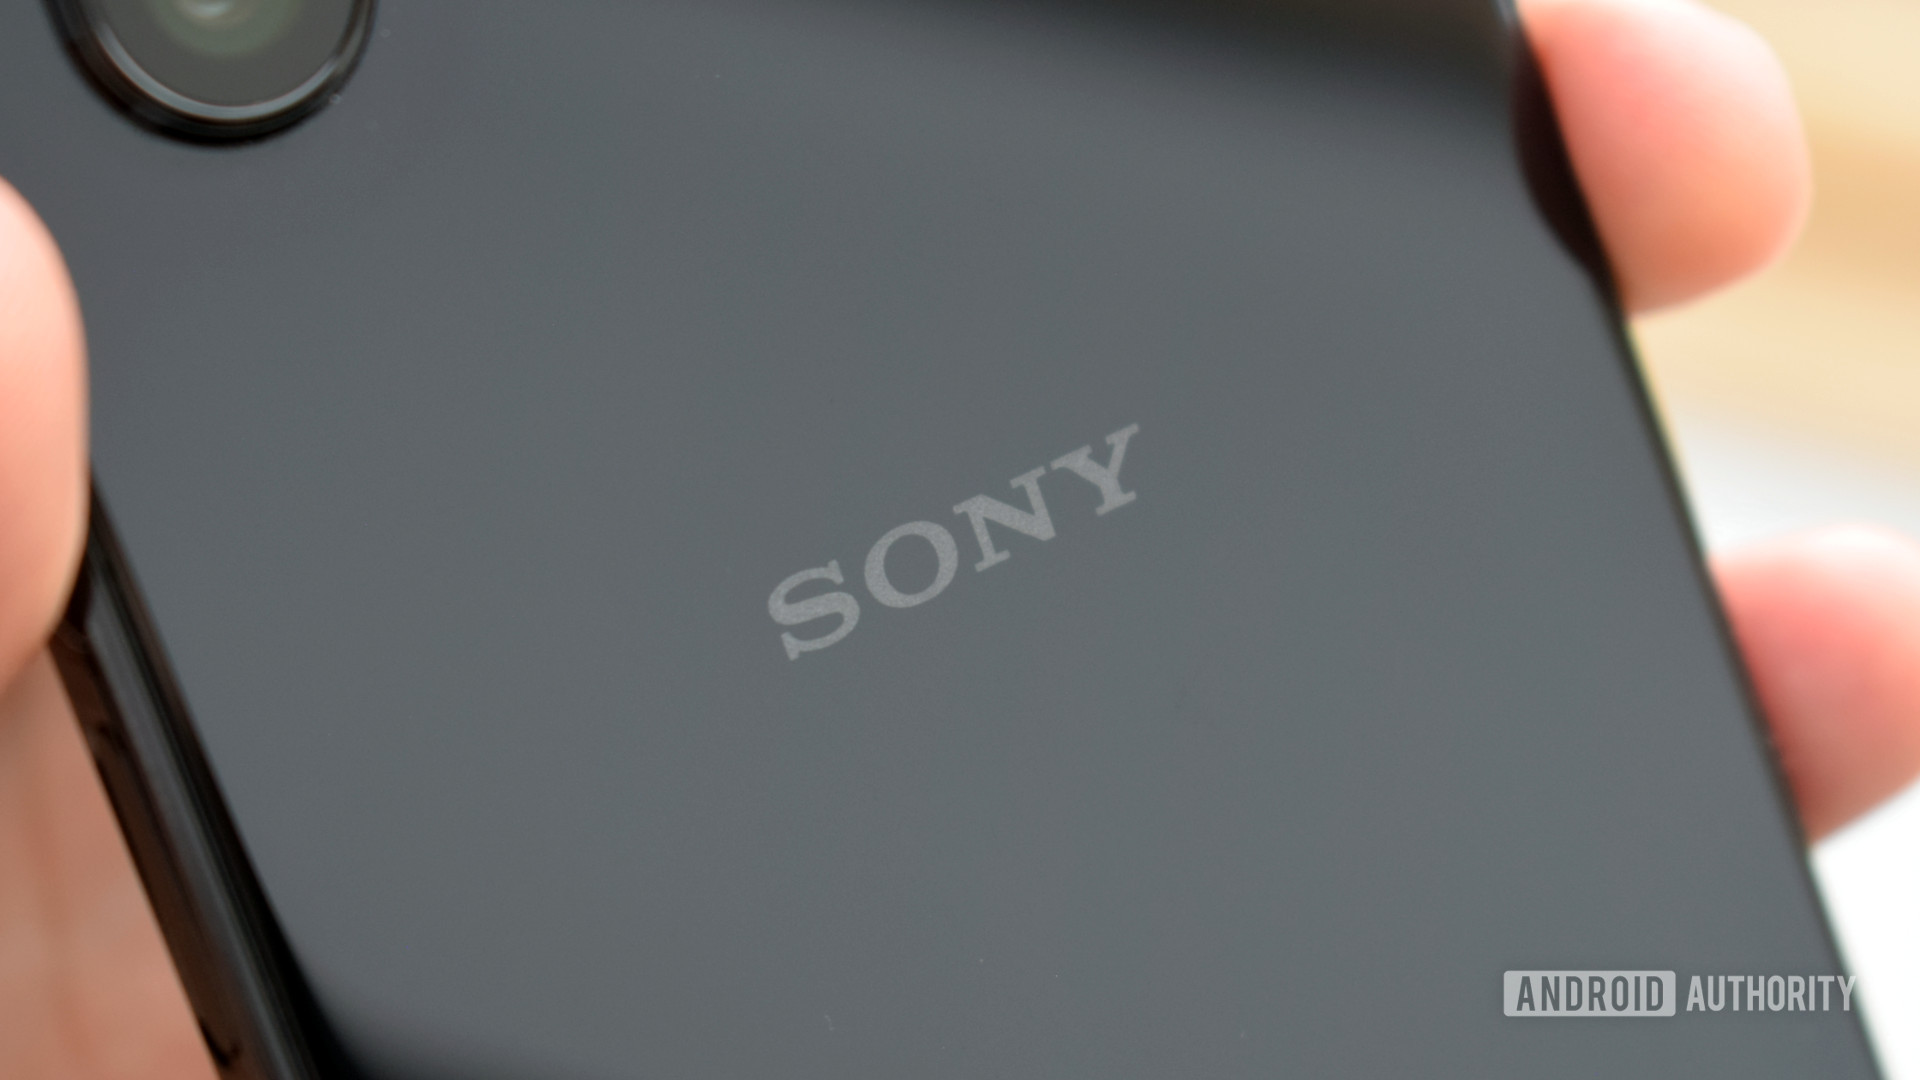 The Sony Xperia 1 II in hand, rear view showing the Sony logo.